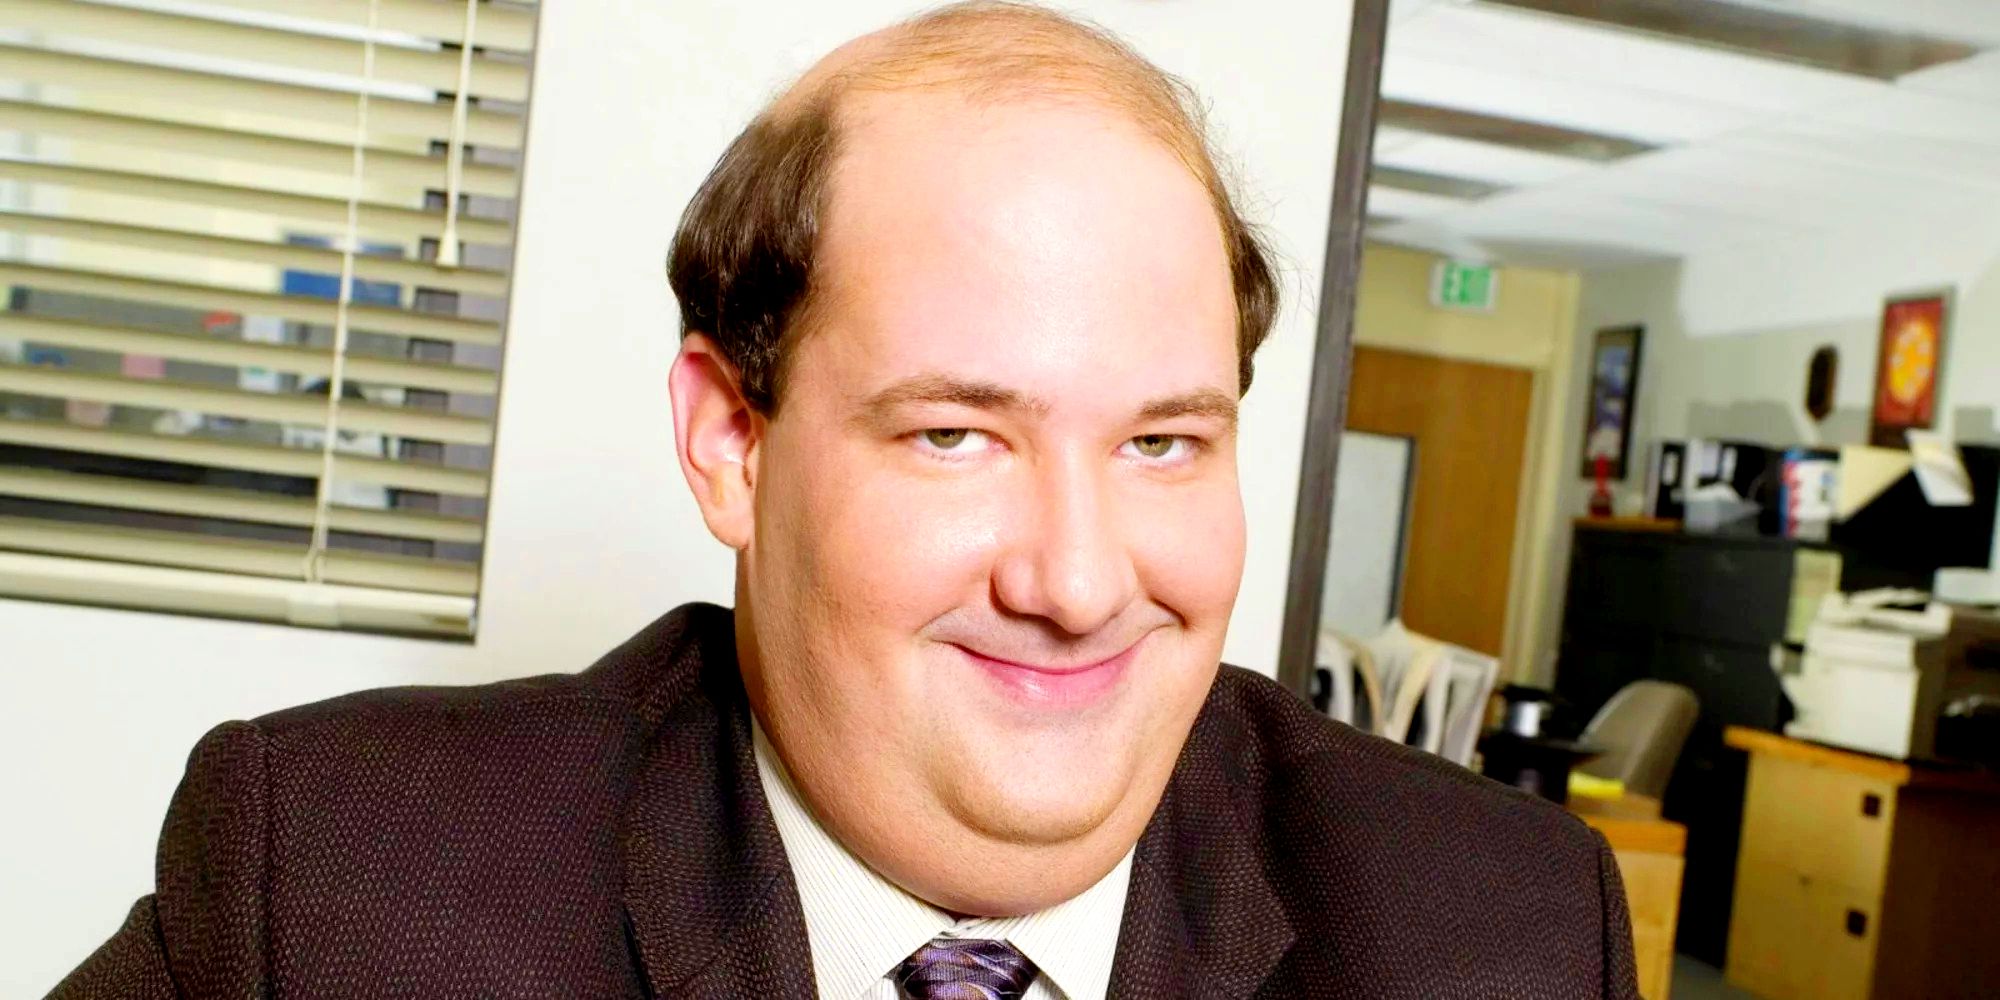 Kevin Malone laughing for the camera in The Office